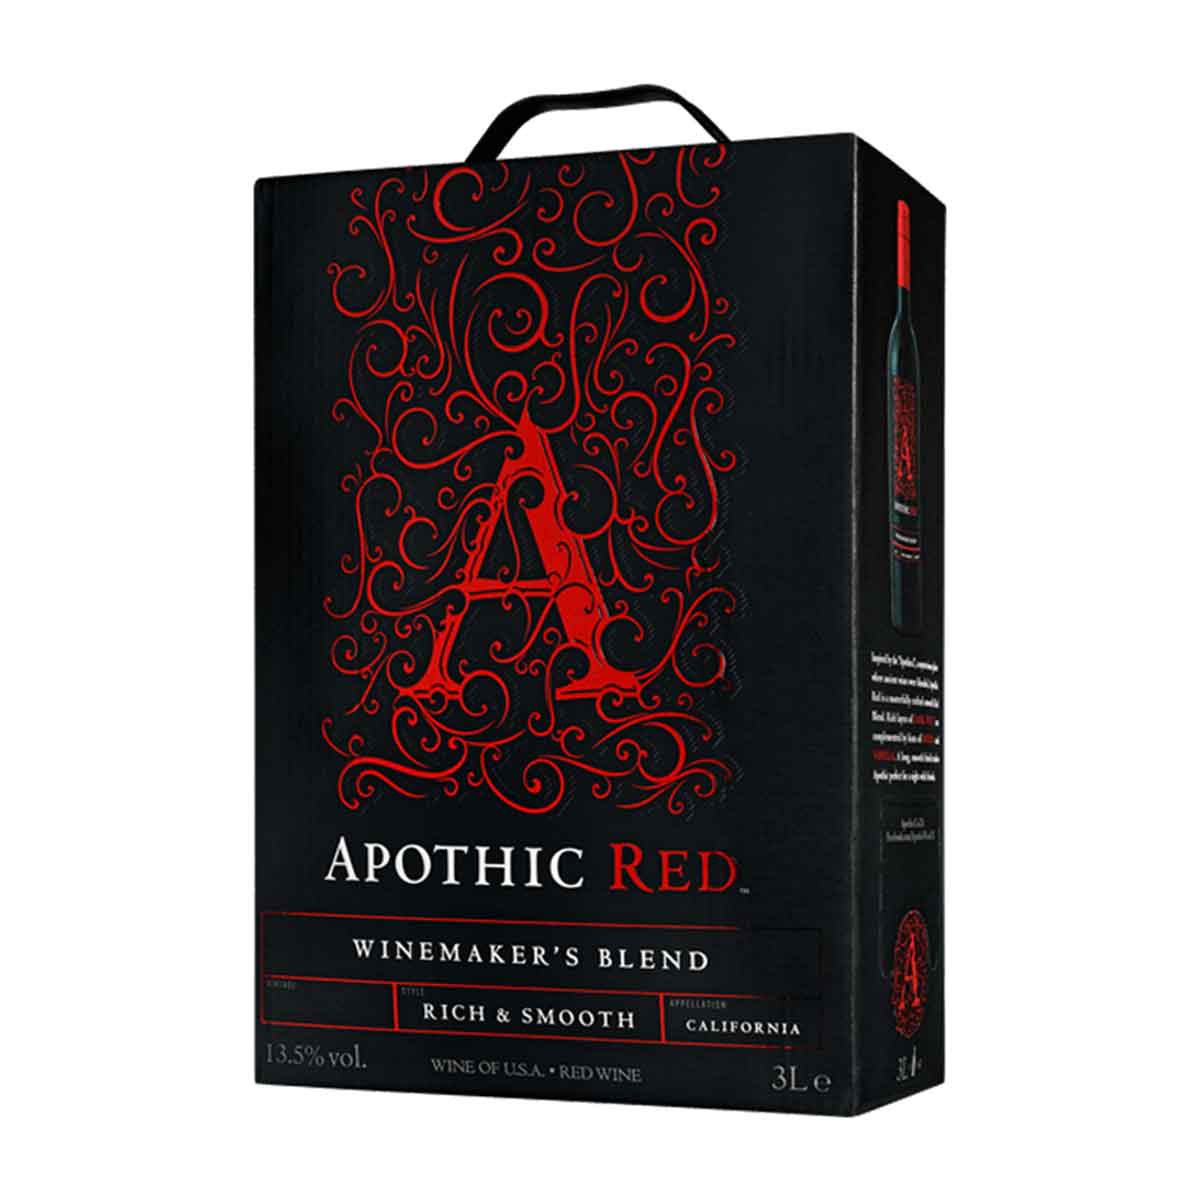 TAG Liquor Stores BC-Apothic Red Winemaker's Blend 3L